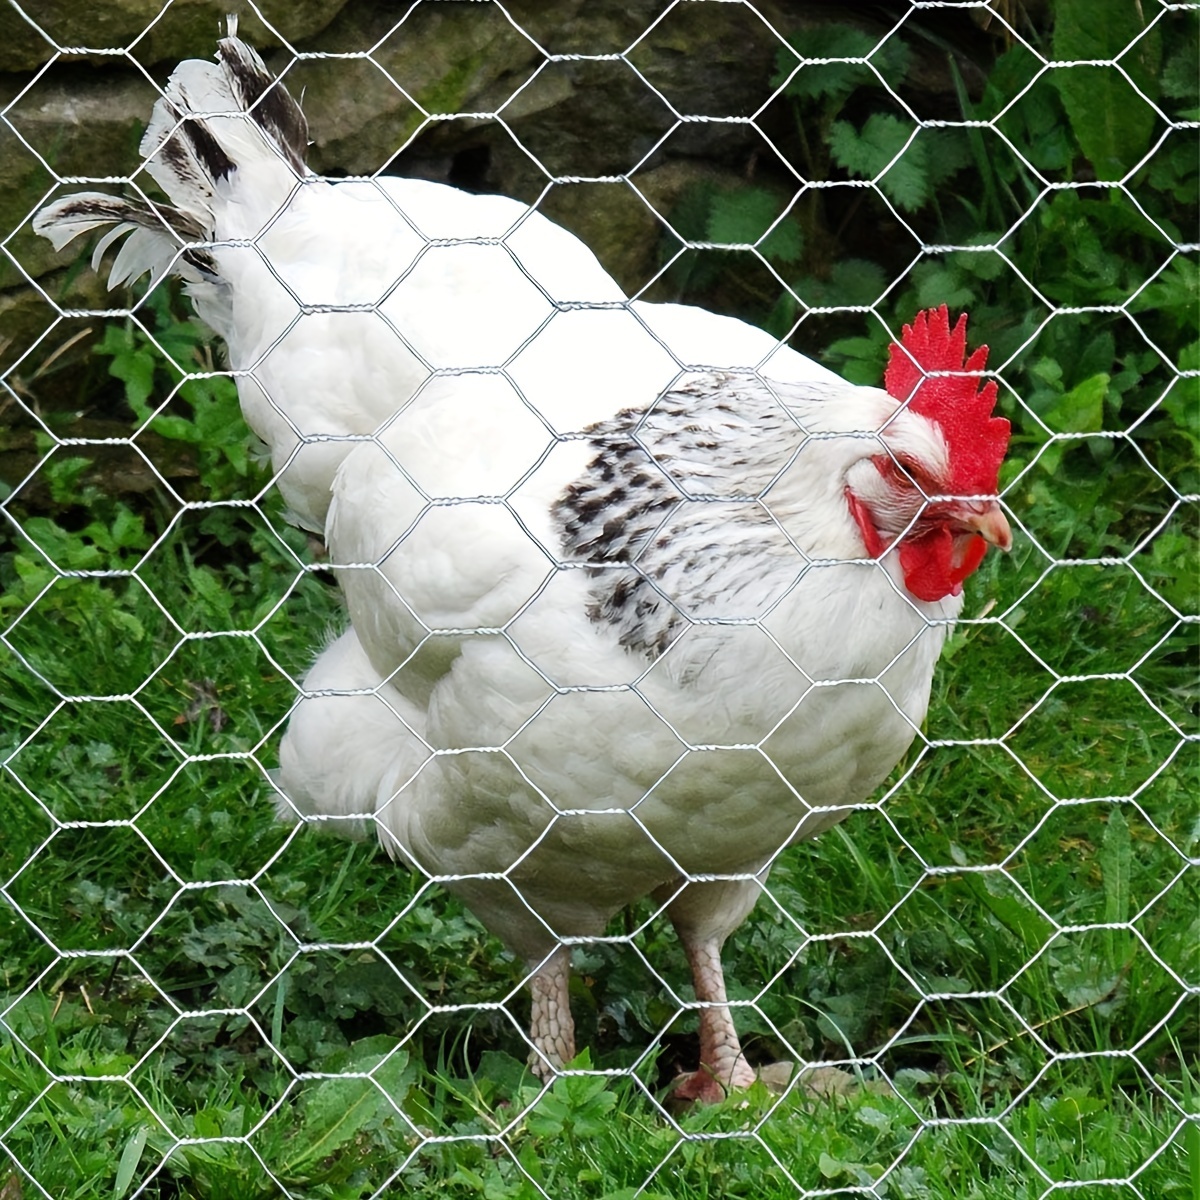 Chicken Wire Fencing Poultry Wire Mesh Fence Yard Garden Crafting Decor 